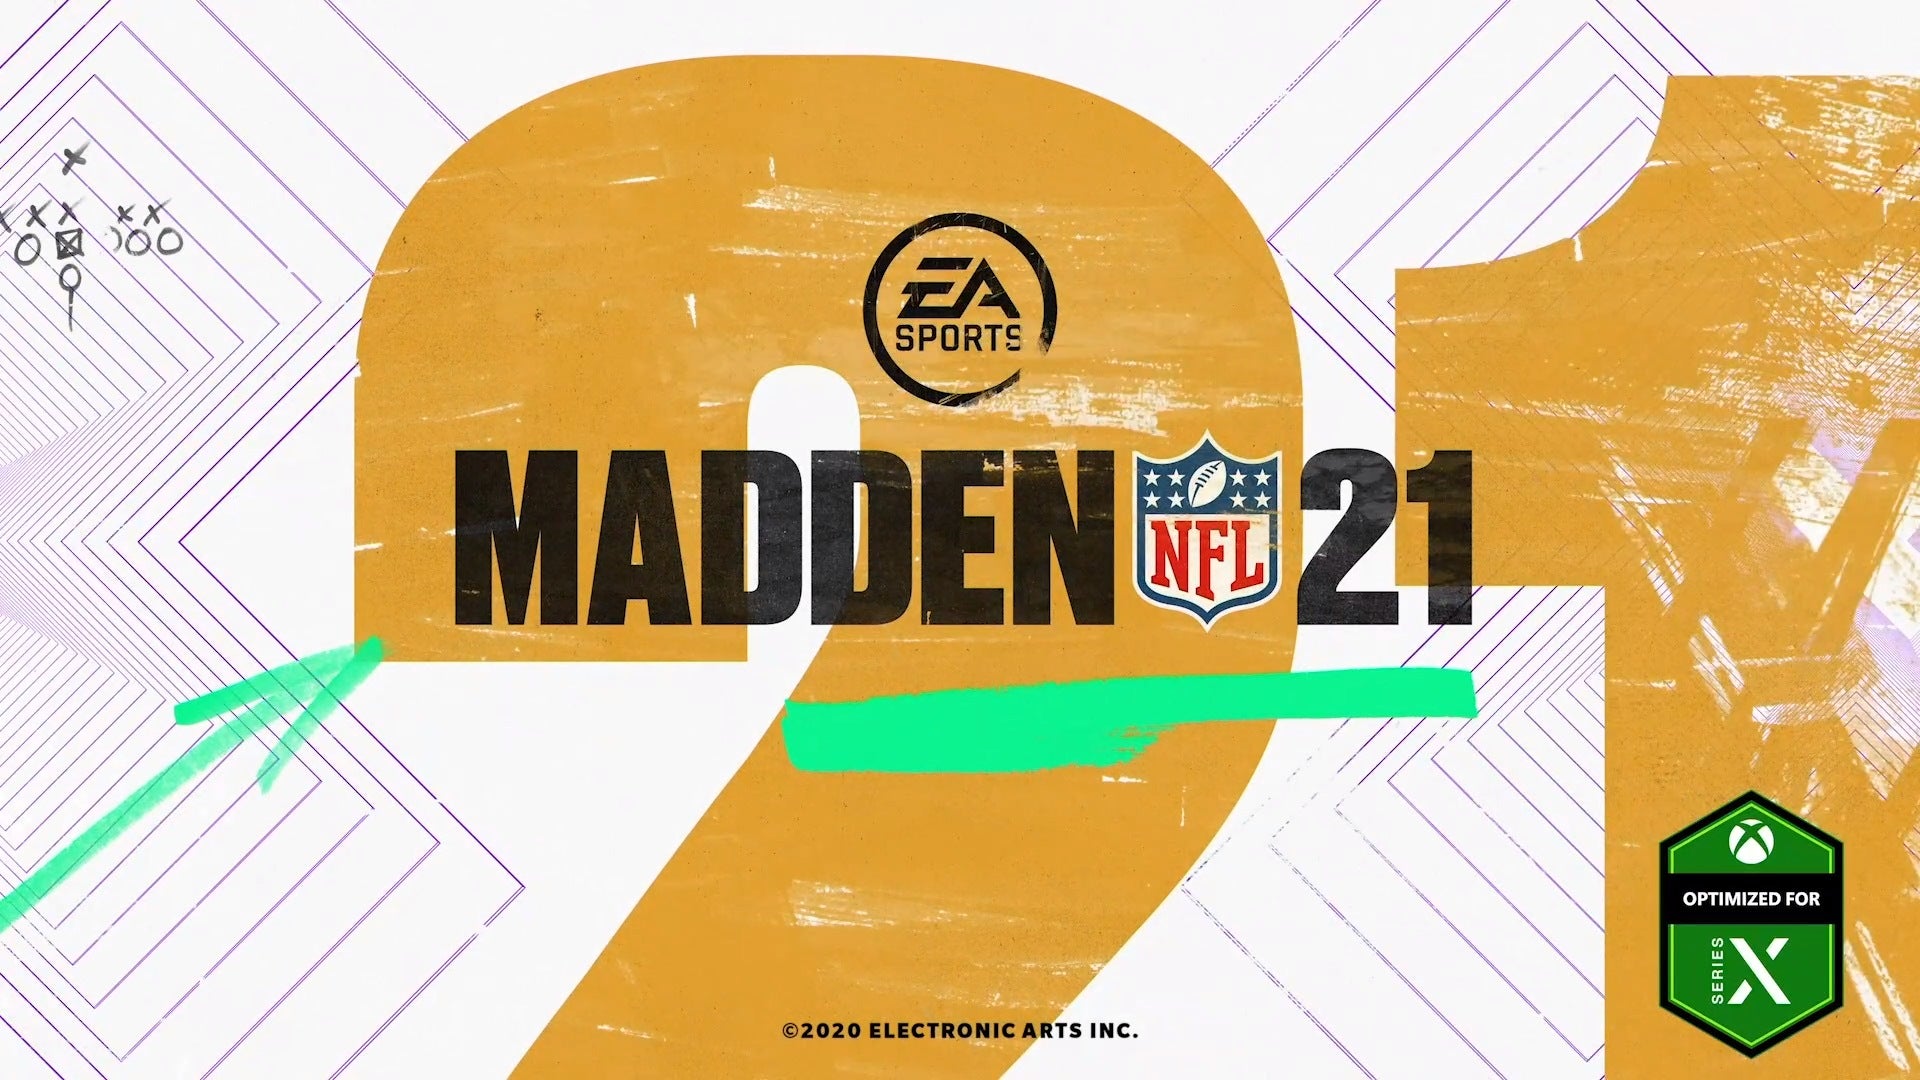 Image for Madden 21 players on Xbox One can upgrade to Xbox Series X version up to the release of Madden 22